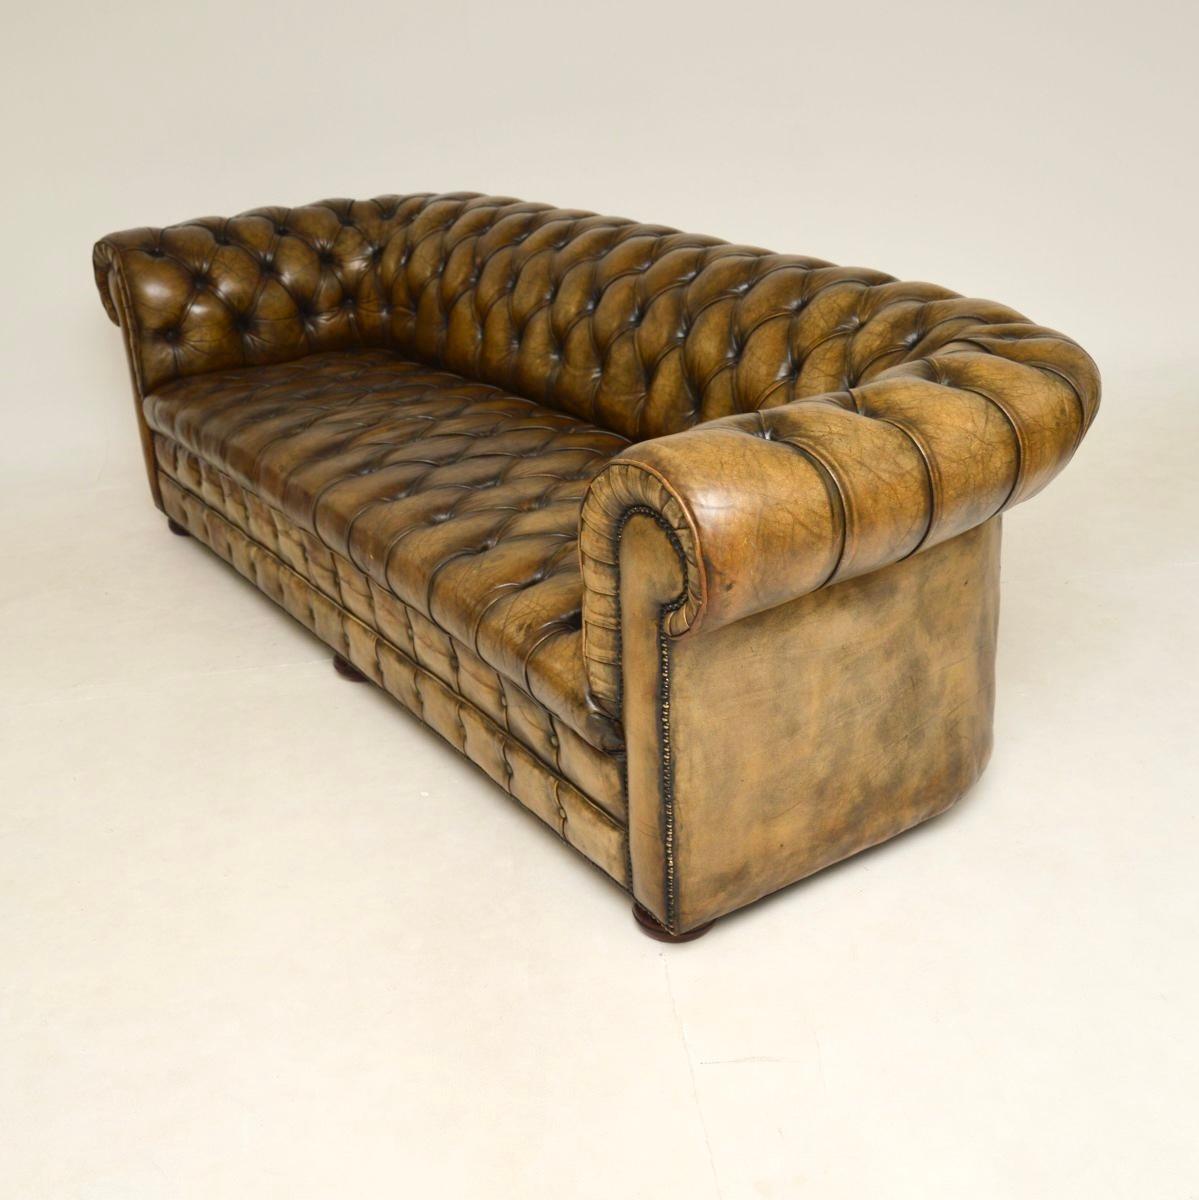 British Antique Leather Chesterfield Sofa For Sale